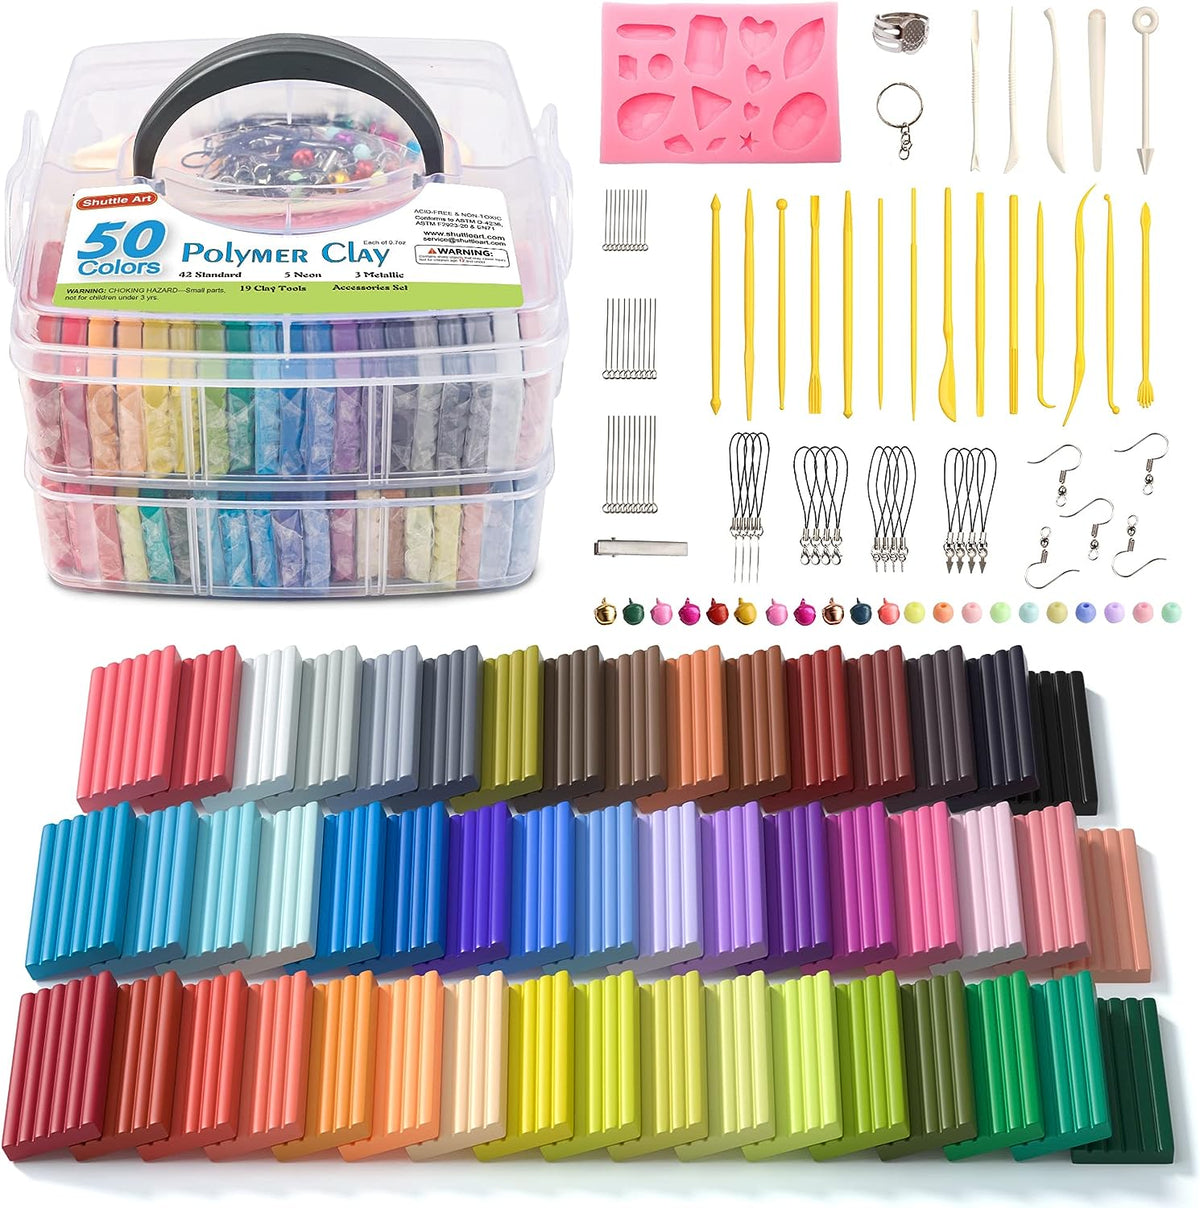 Polymer Clay Shuttle Art 82 Colors Oven Bake Modeling Clay Creative Clay Kit  with 19 Clay Tools and 16 Kinds of Accessories Non-Toxic Non-Sticky Ideal  DIY Art Craft Clay Gift for Kids